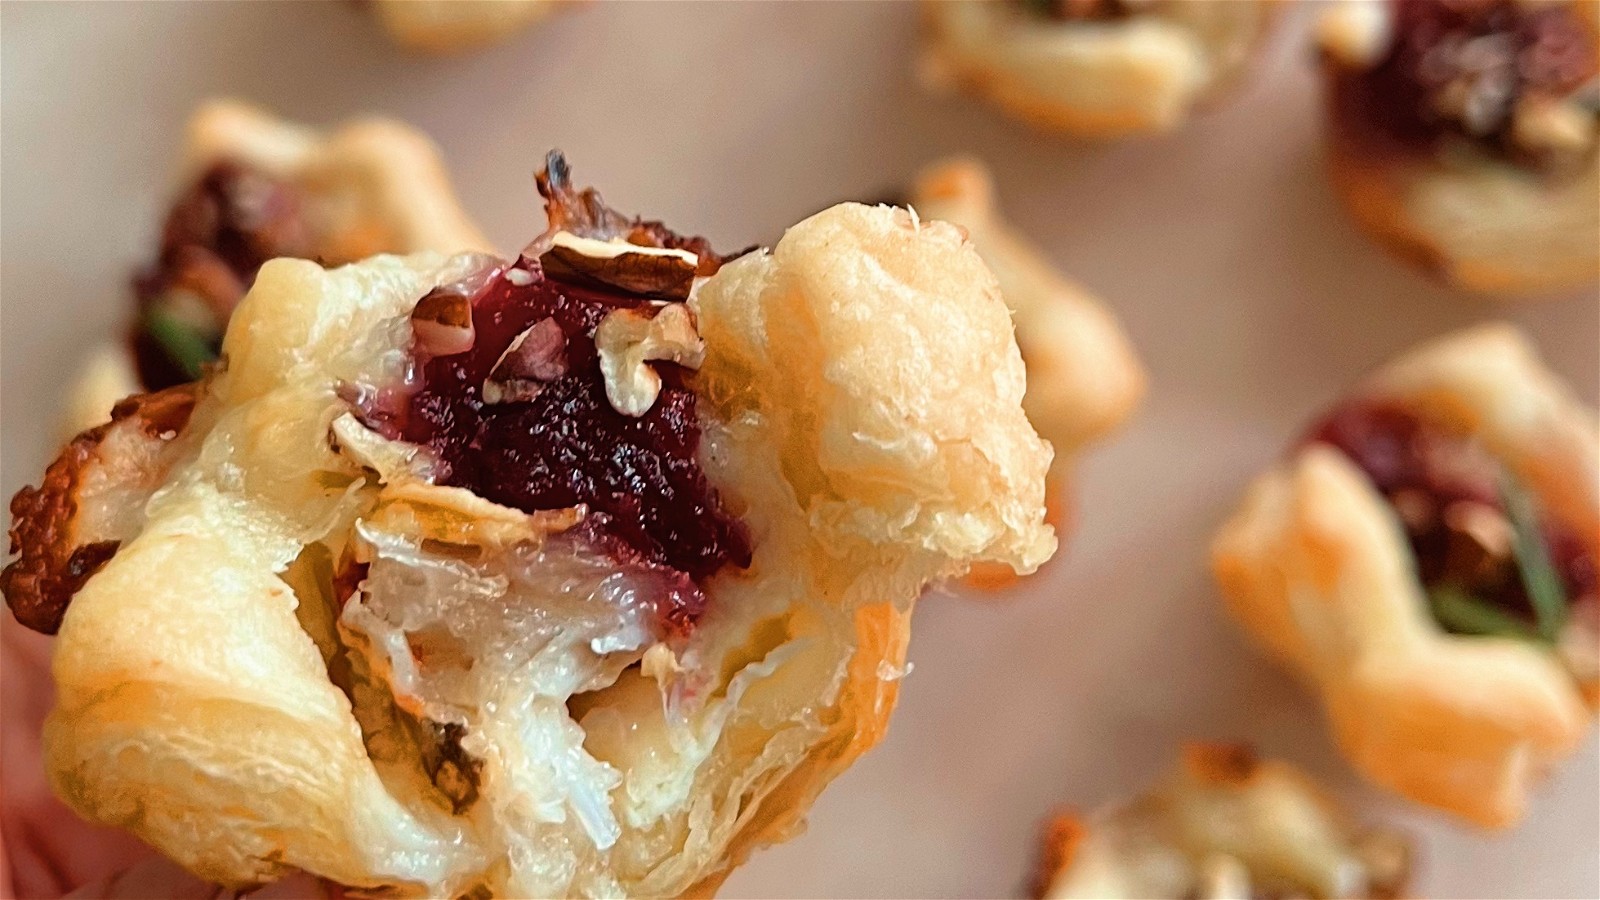 Image of Baked Brie Bites with Dungeness Crab Meat